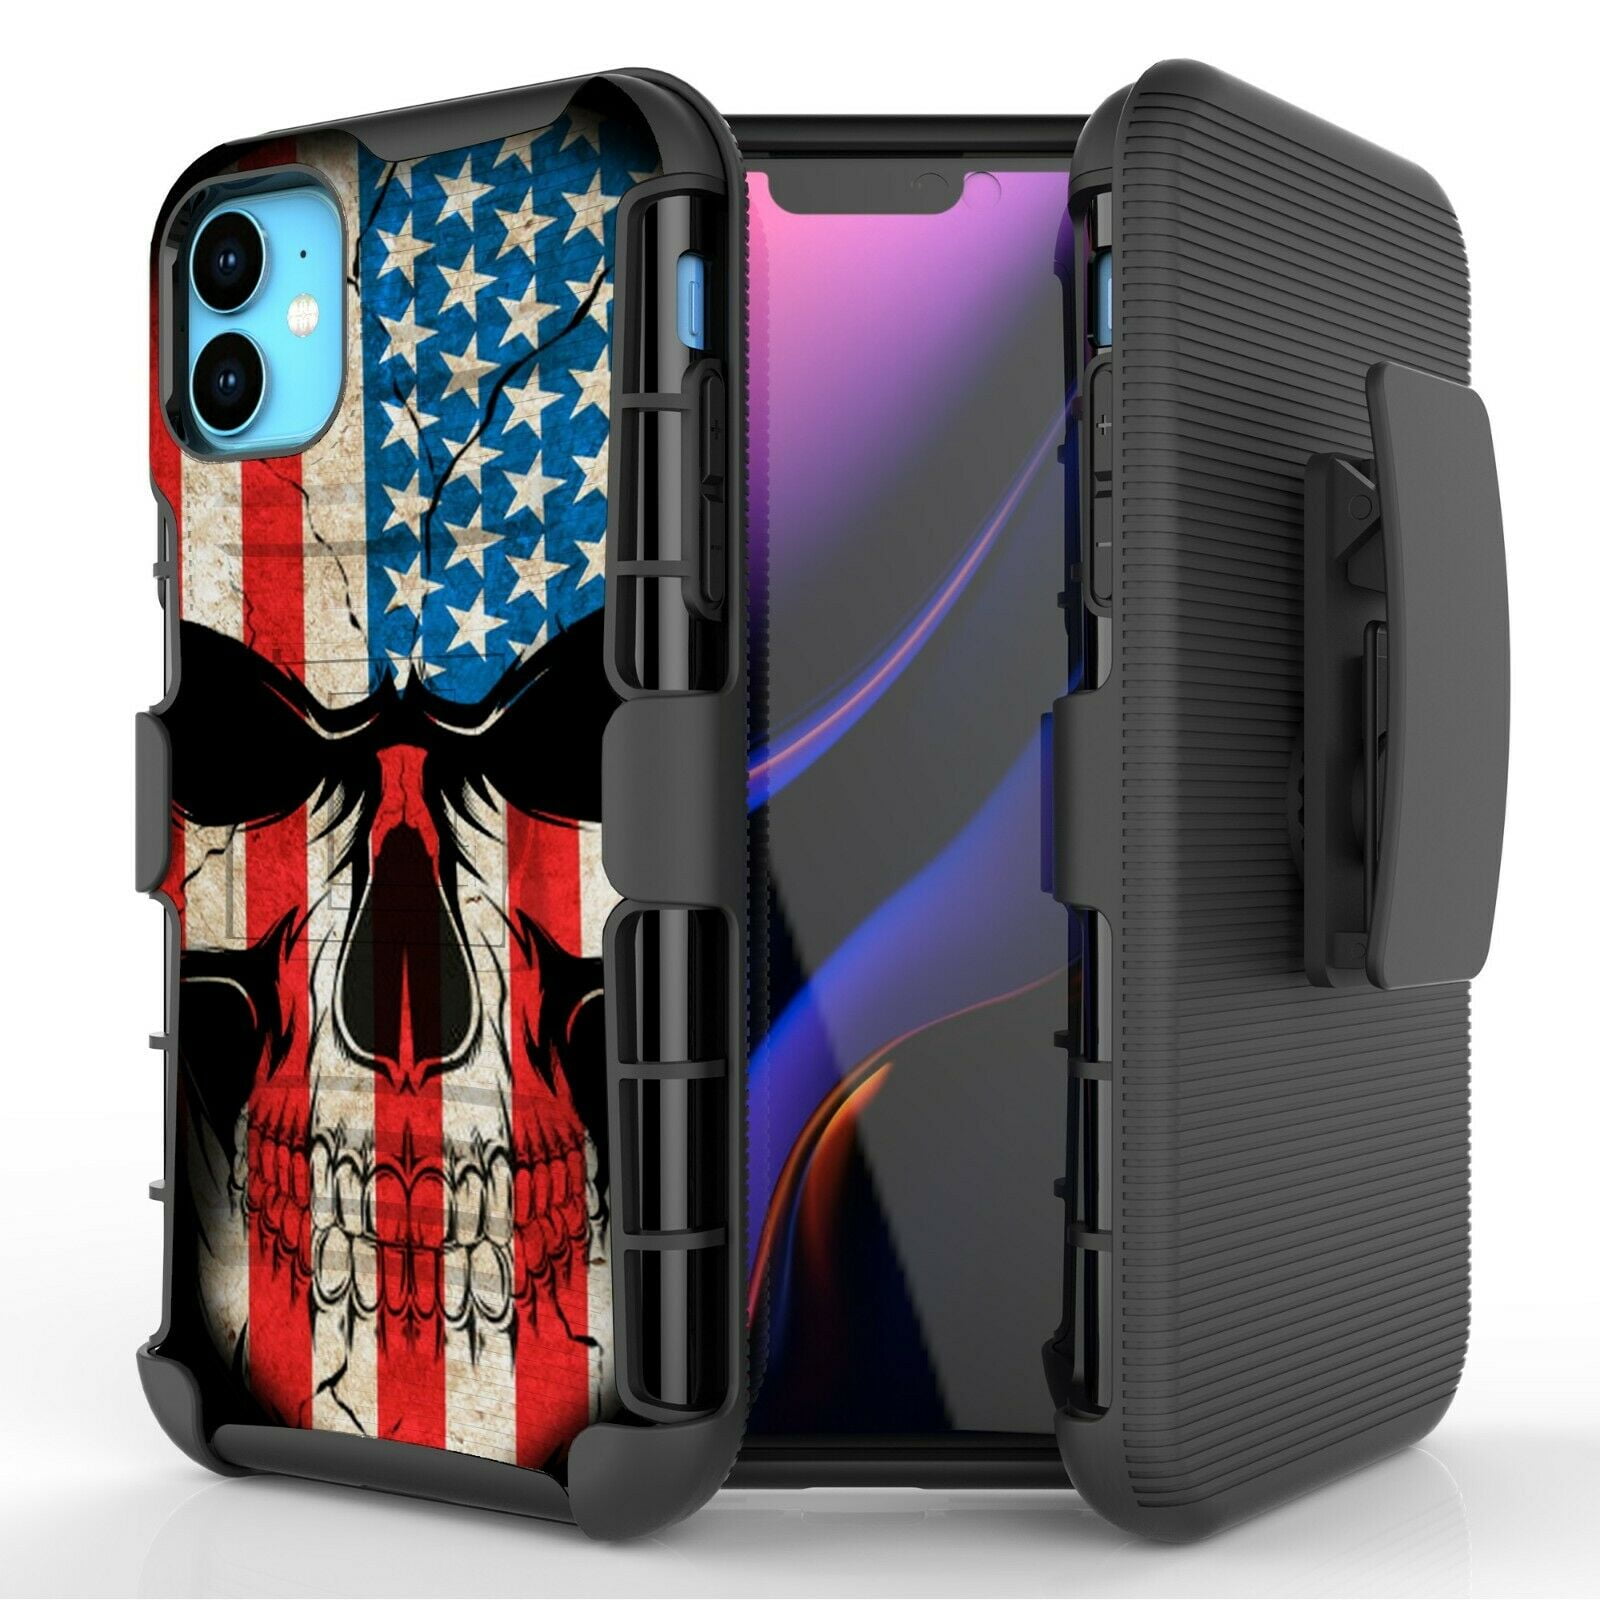 for Apple iPhone 11 Pro Max (6.5inch) Case Heavy Duty Shock Absorption